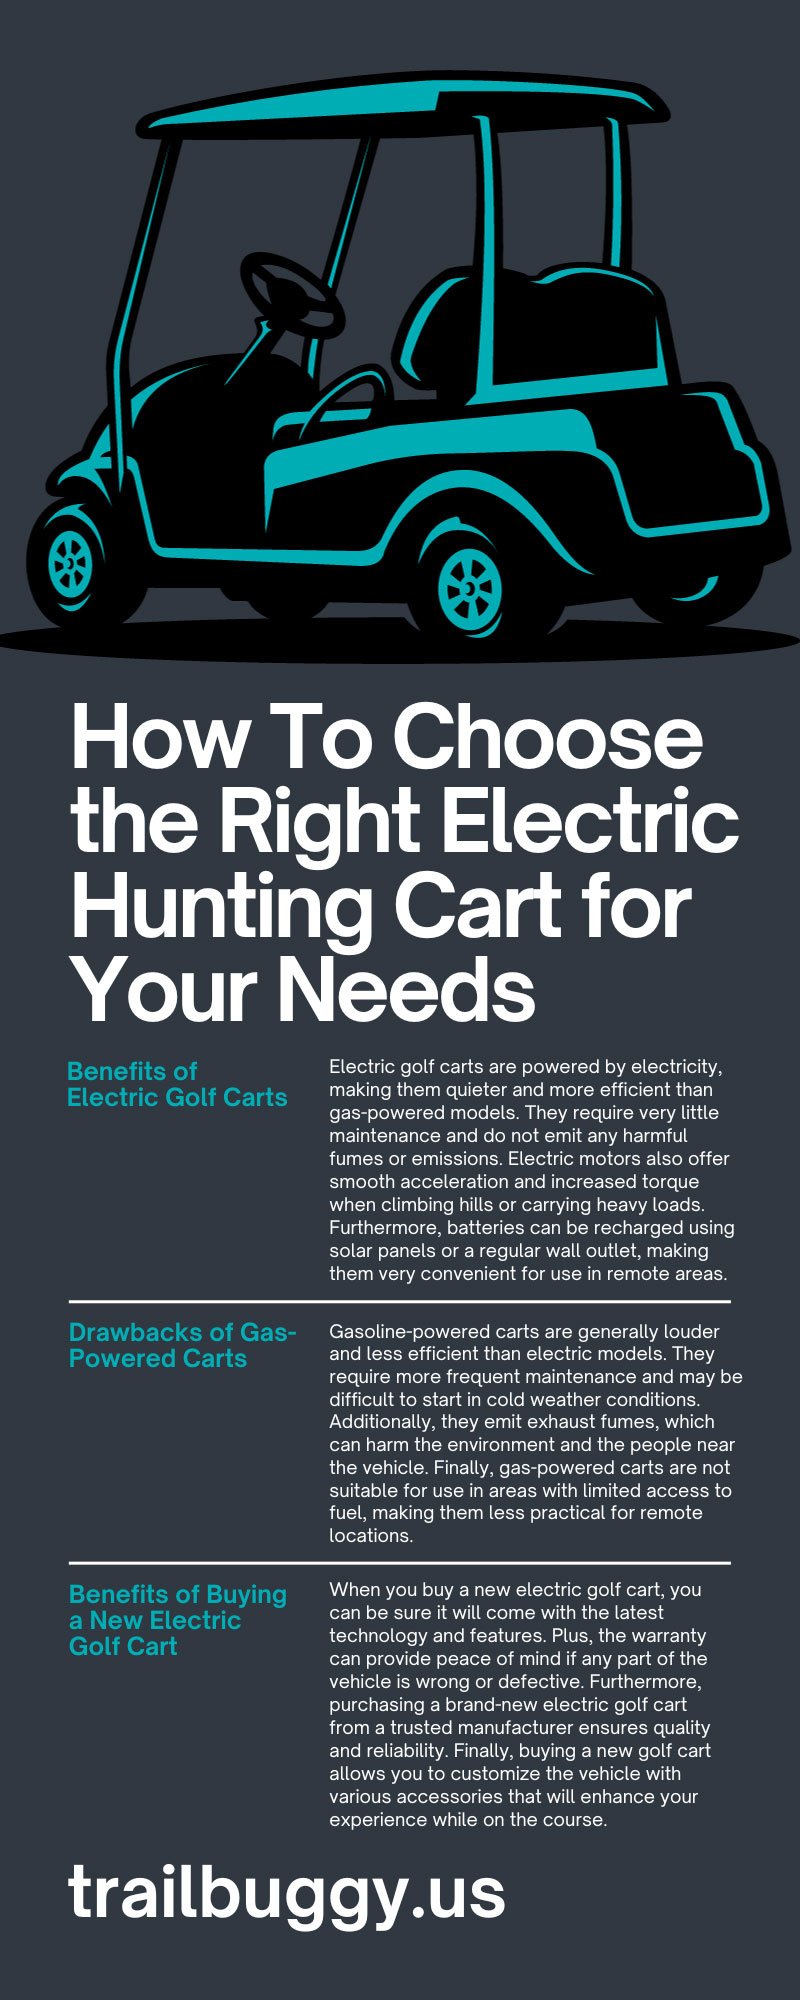 How To Choose the Right Electric Hunting Cart for Your Needs